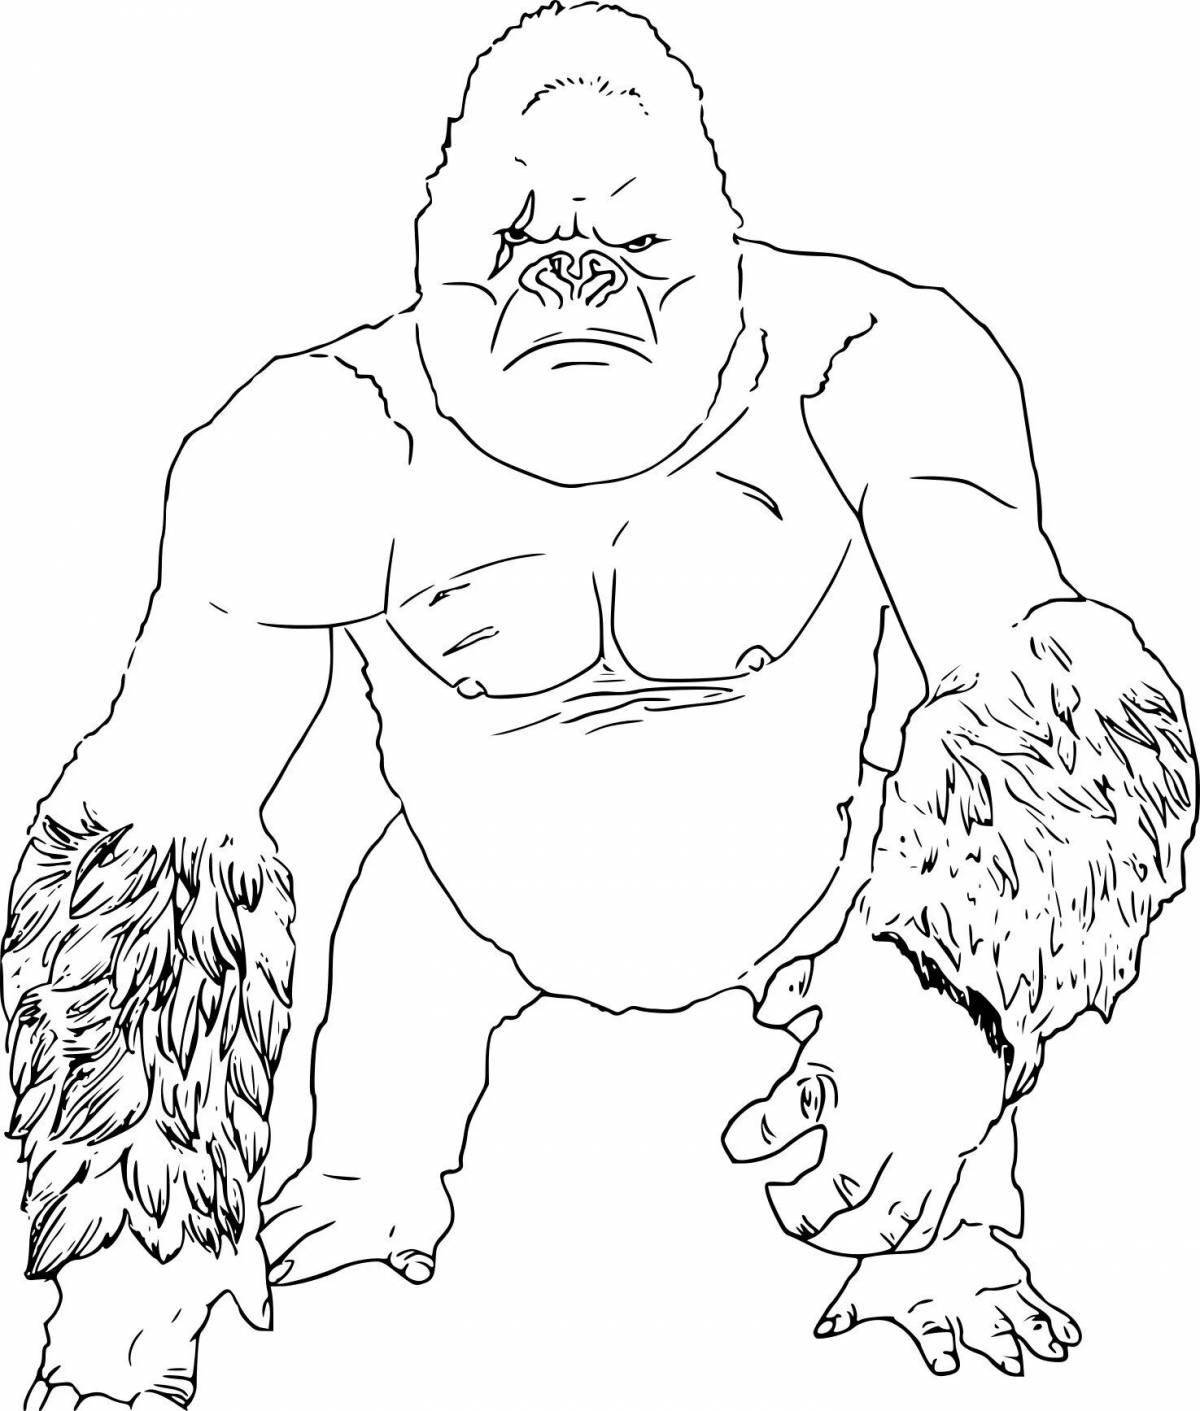 King Kong coloring book for kids